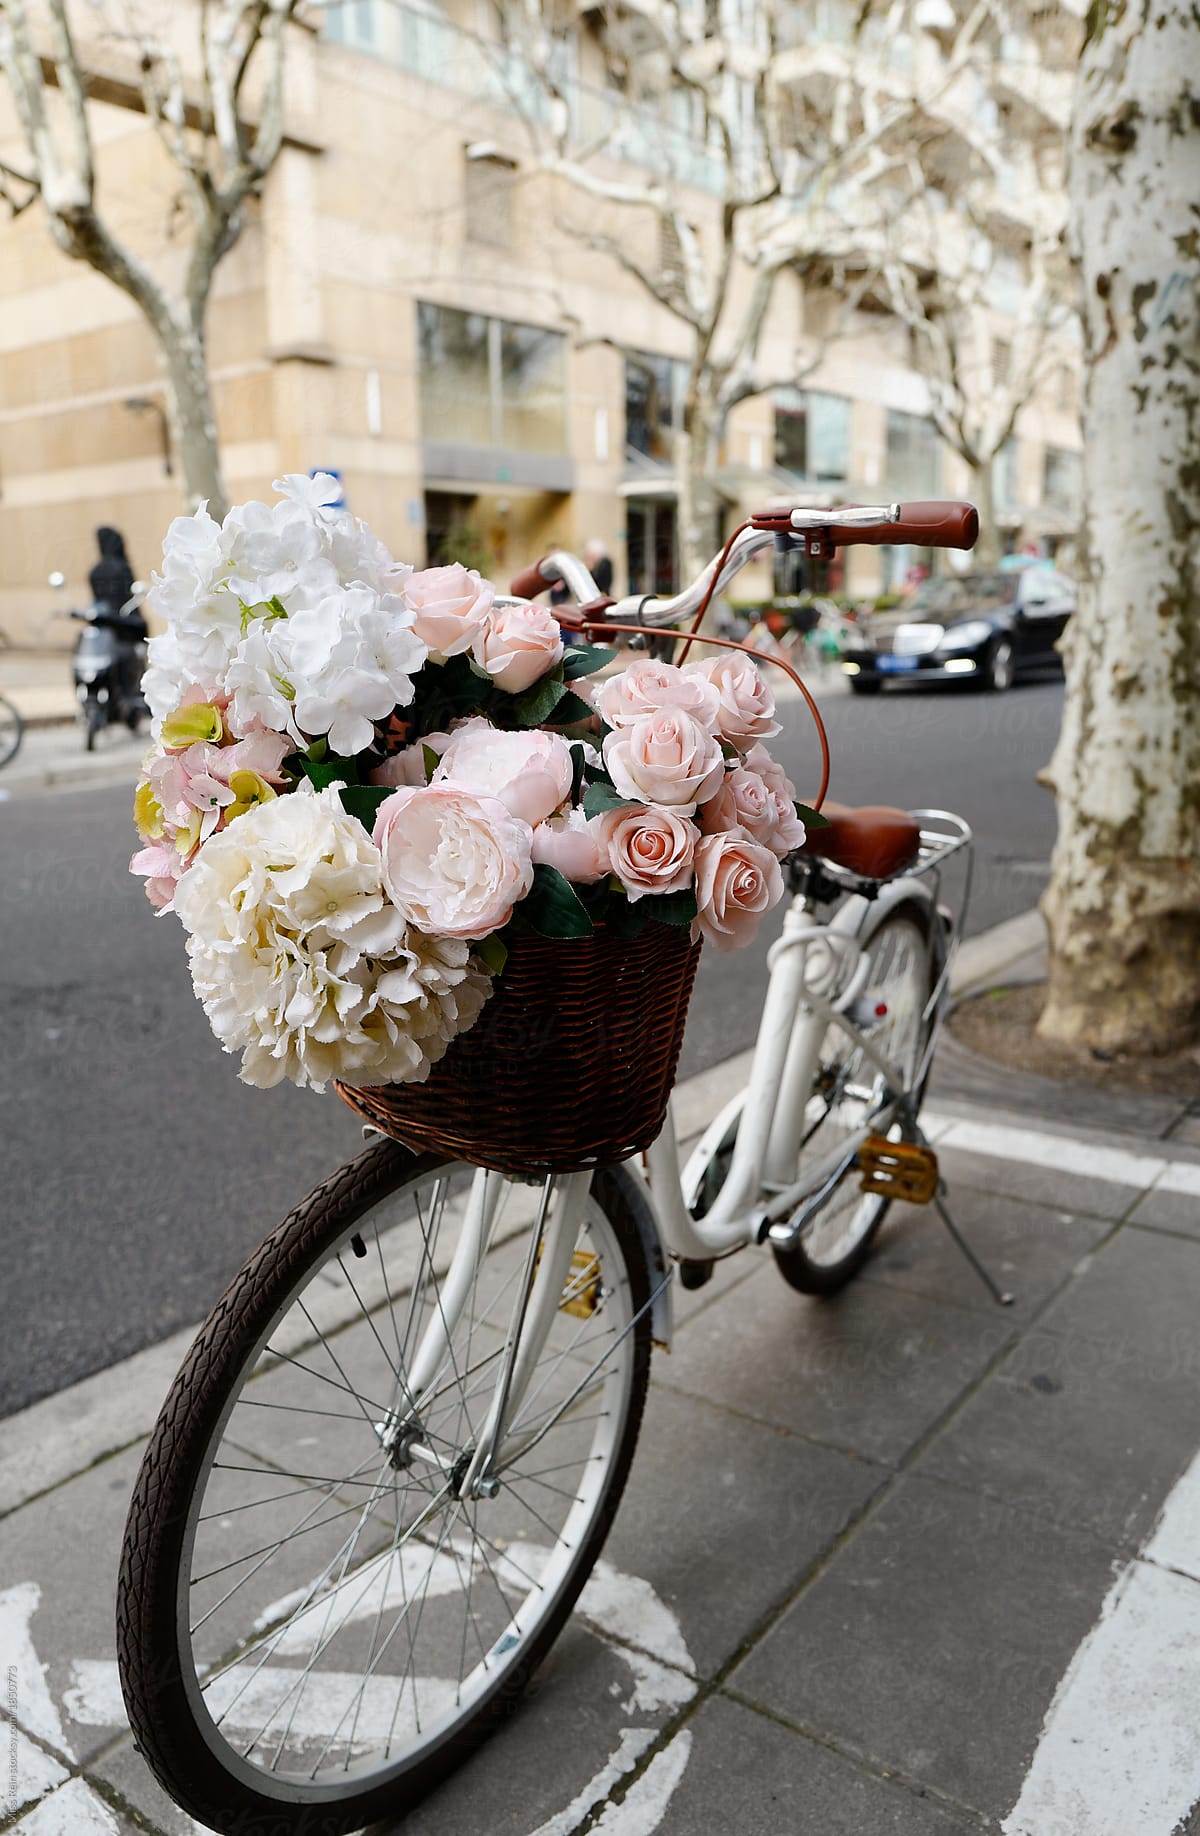 White bike filled with flowers in the basket